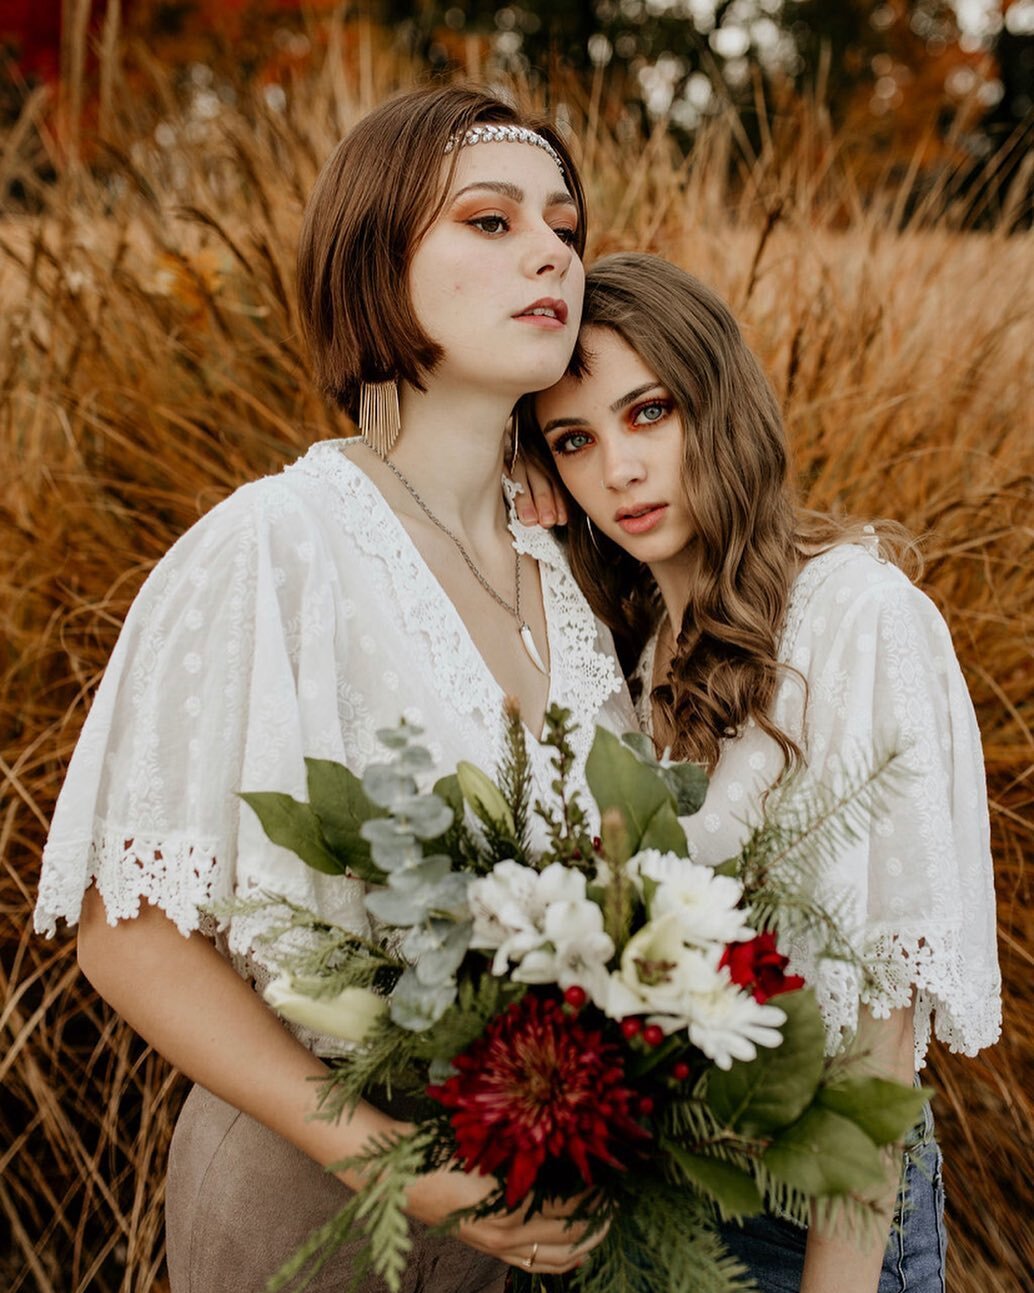 throwback to these gorgeous ladies and fall tones 🌼🌿
almost through wedding season, this is the final stretch wedding vendors! we can do this 🤍